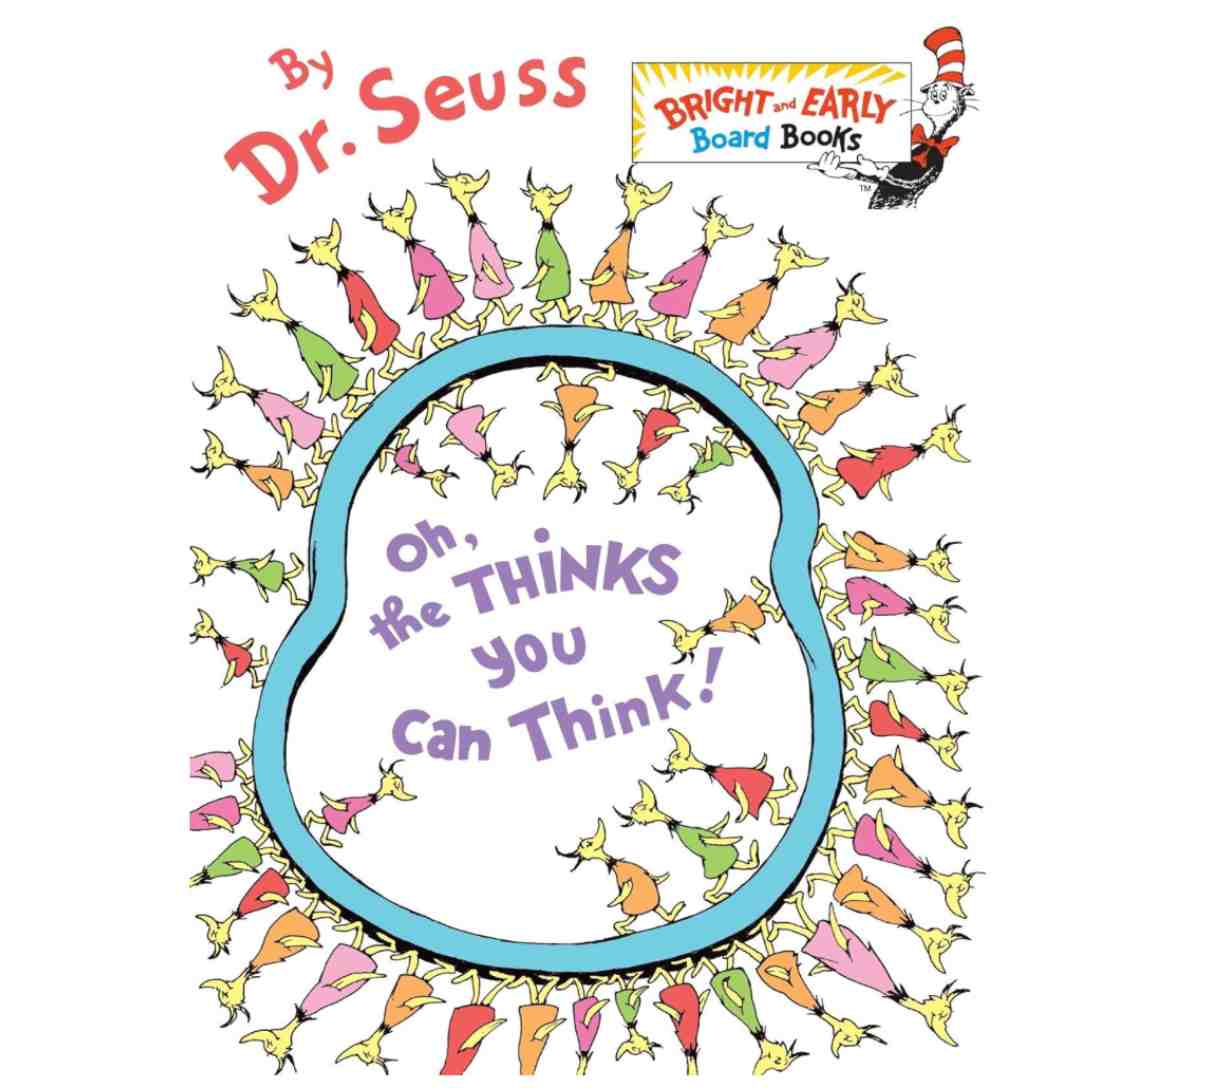 Oh, the Thinks You Can Think! (Board Book)